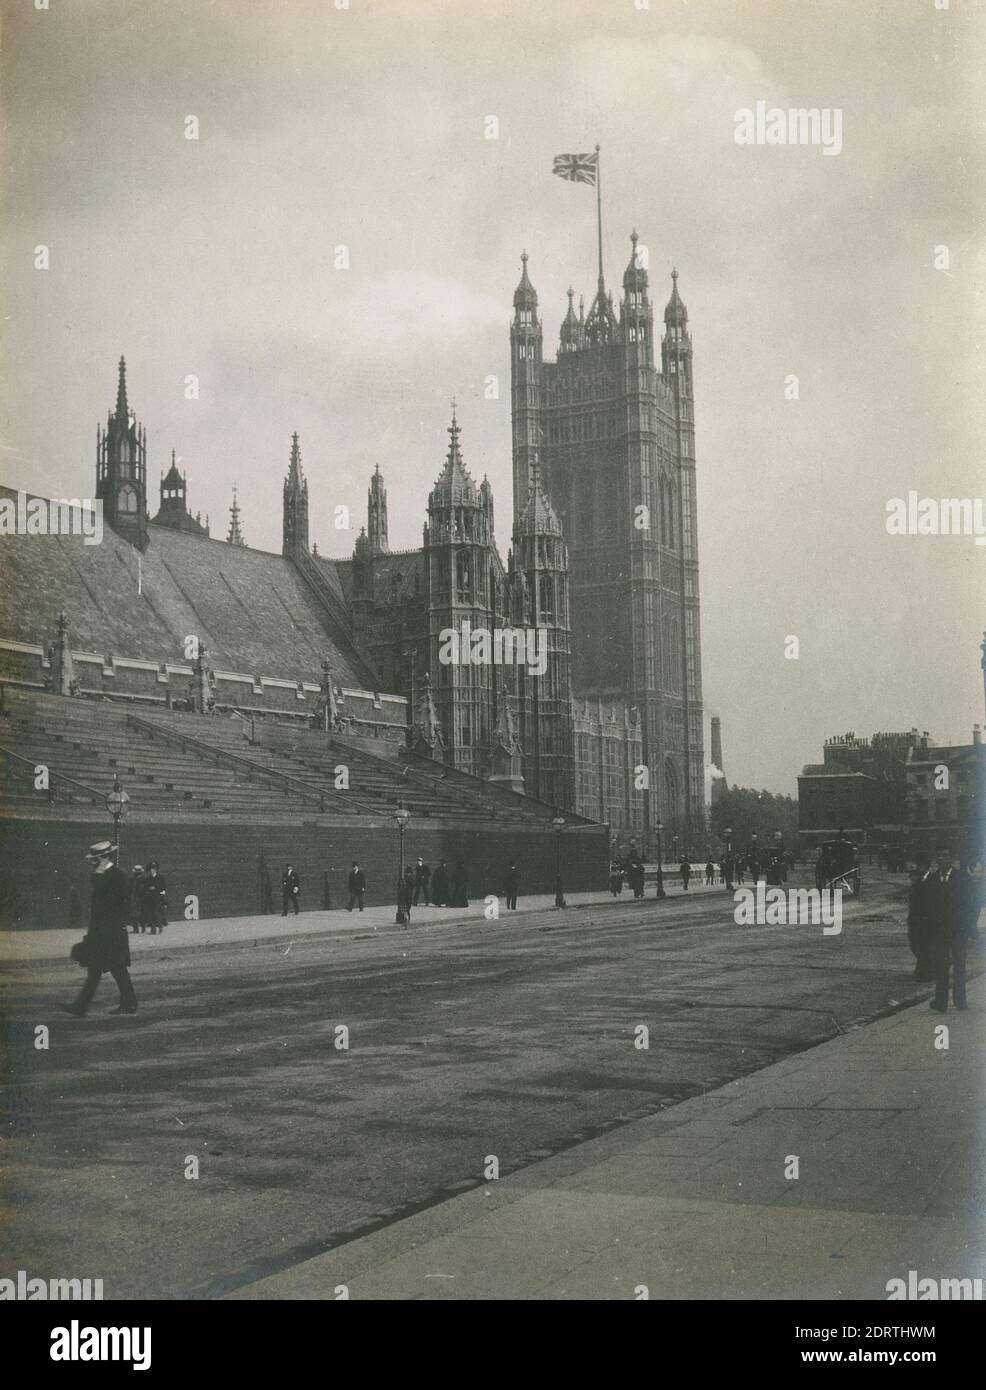 Antique c1900 photograph, Palace of Westminster from Abingdon Street in London, England. There are bleachers set up in front of Westminster Hall, perhaps for the Coronation procession of King Edward VII in 1902. SOURCE: ORIGINAL PHOTOGRAPH Stock Photo